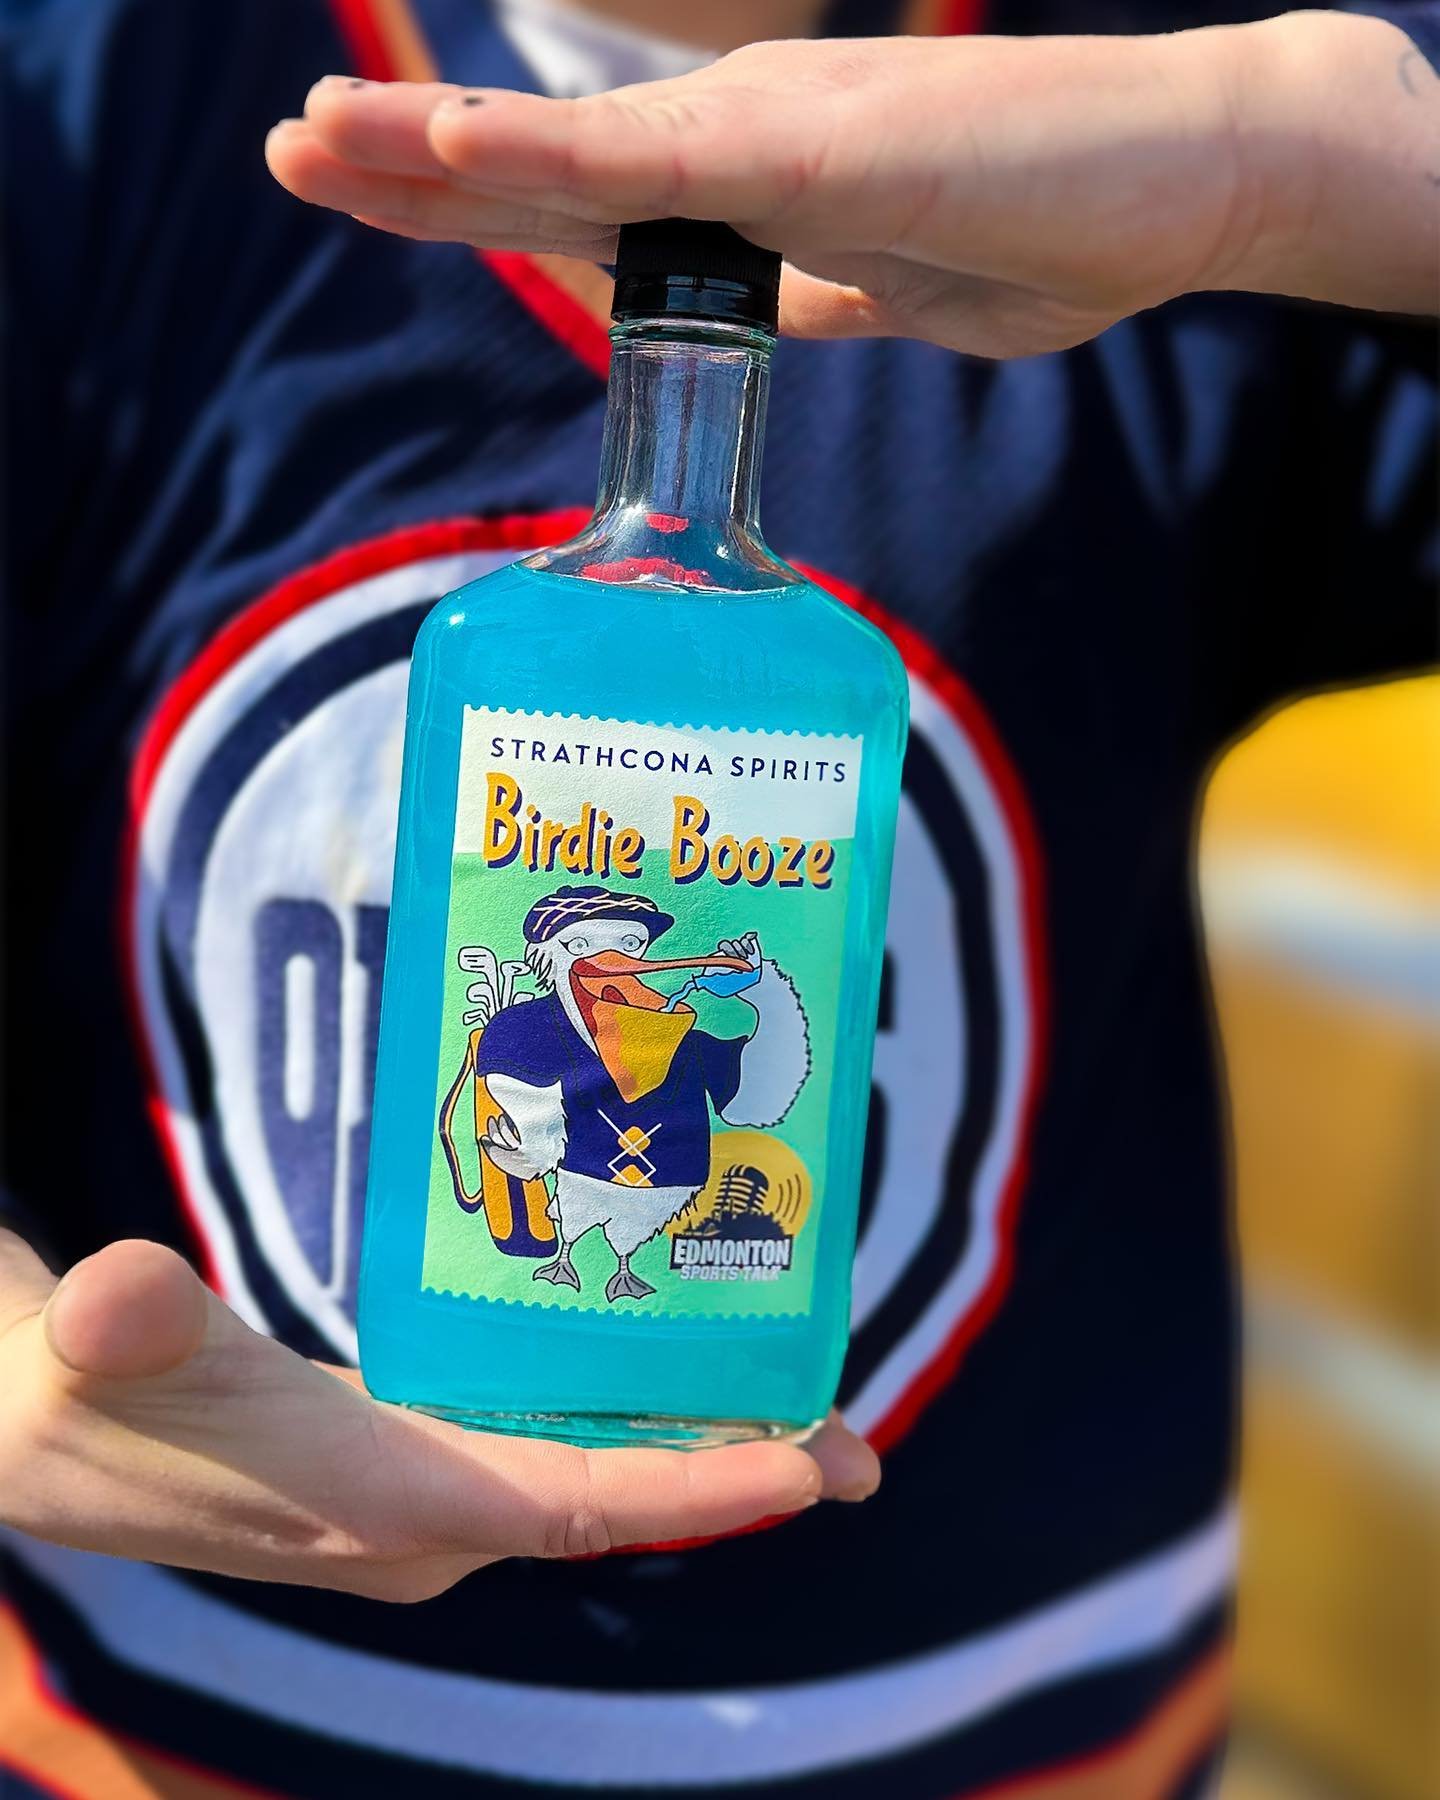 🦆 Birdie Booze - the newest (and bluest!) sip at ODD Ritchie 🍻

Our neighbours at Strathcona Spirits Distillery crafted this electric blue game-changer featuring hints of tart blue raspberry lemonade 🍋⚡️

With a colour and taste like that!? 
You O